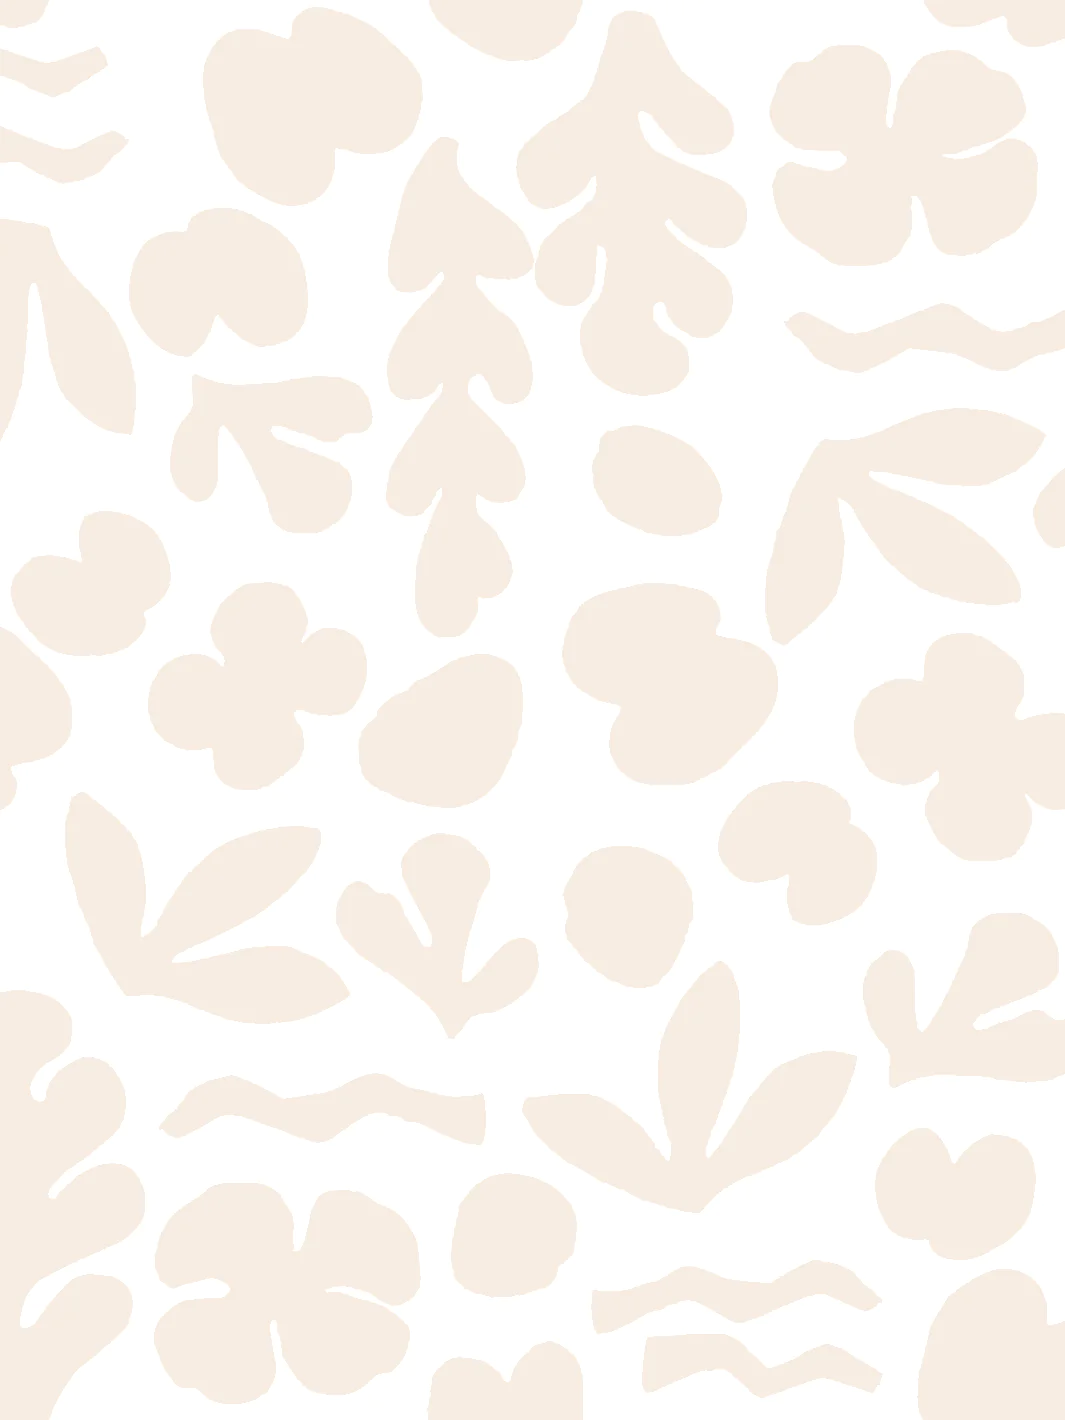 Creamy white wallpaper with a floral design - Abstract